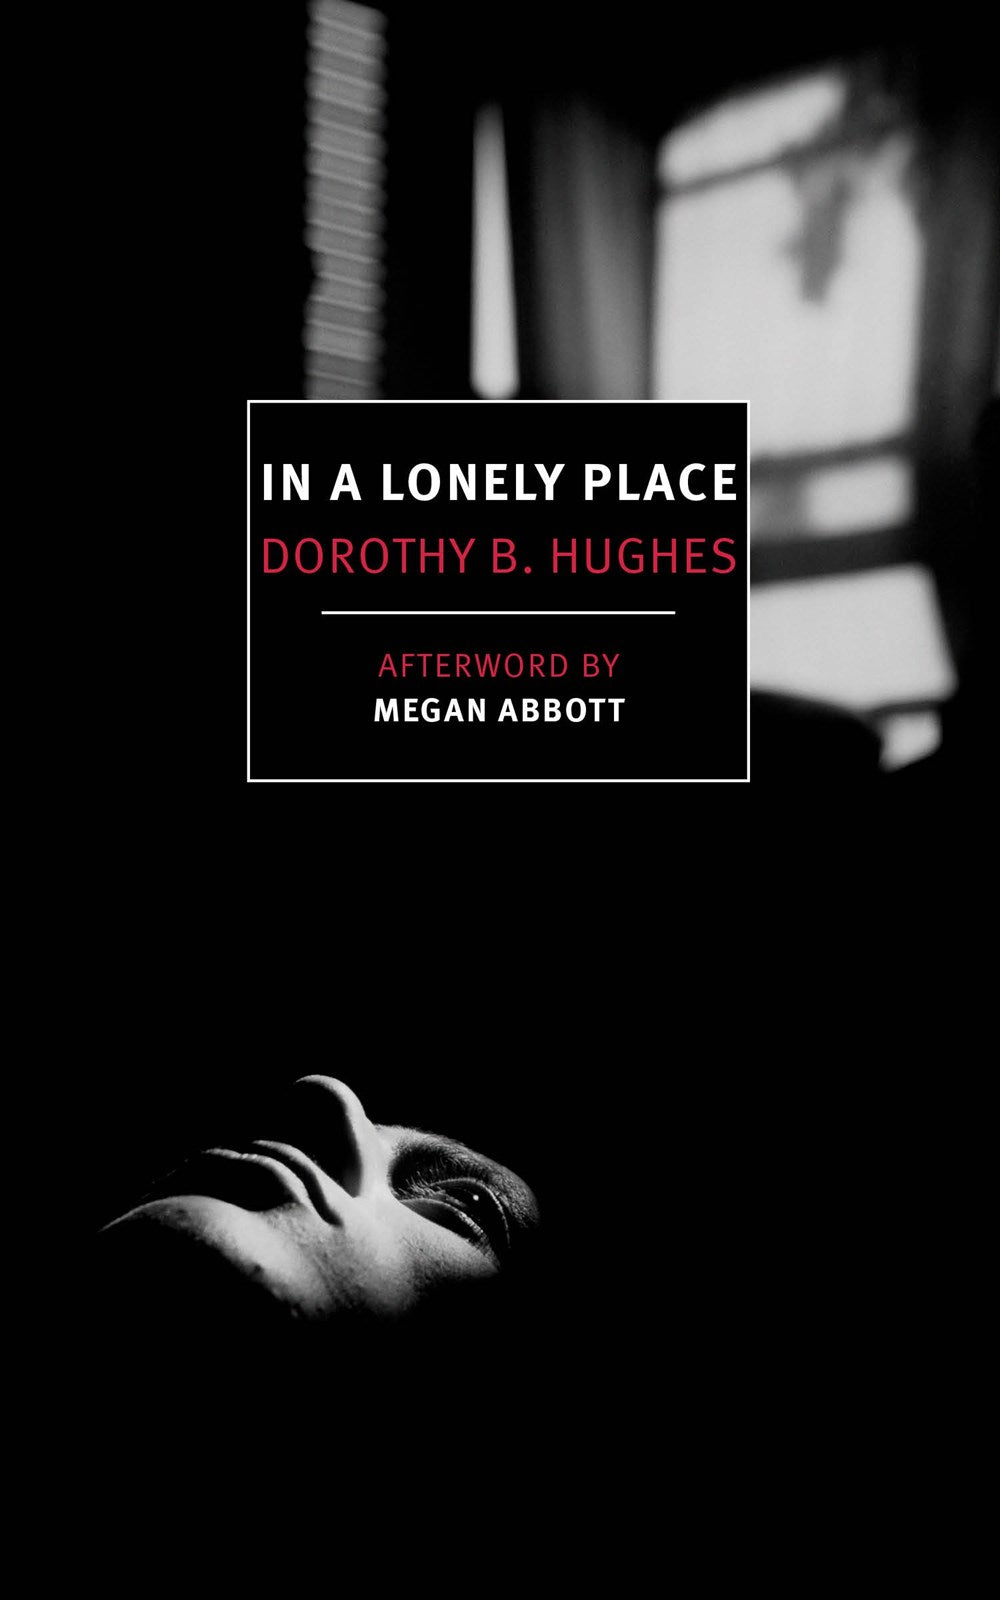 In a Lonely Place by Dorothy B. Hughes (Foreword by Megan Abbott)